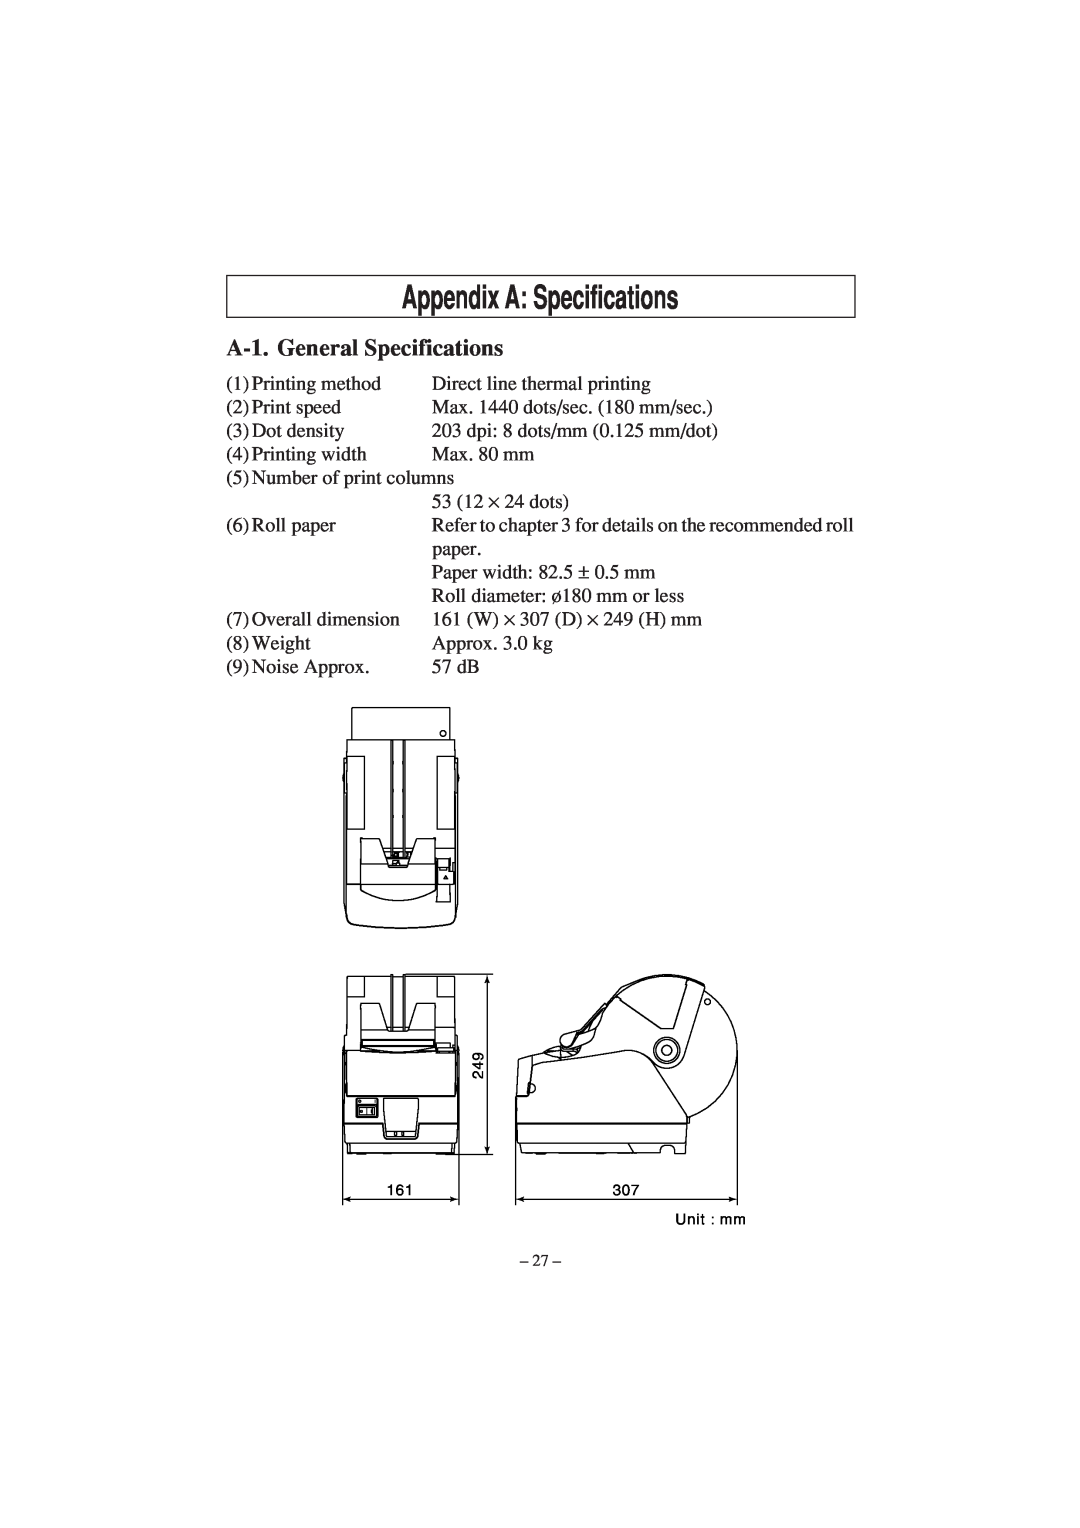 Star Micronics TSP1000 user manual Appendix A Specifications, A-1. General Specifications 